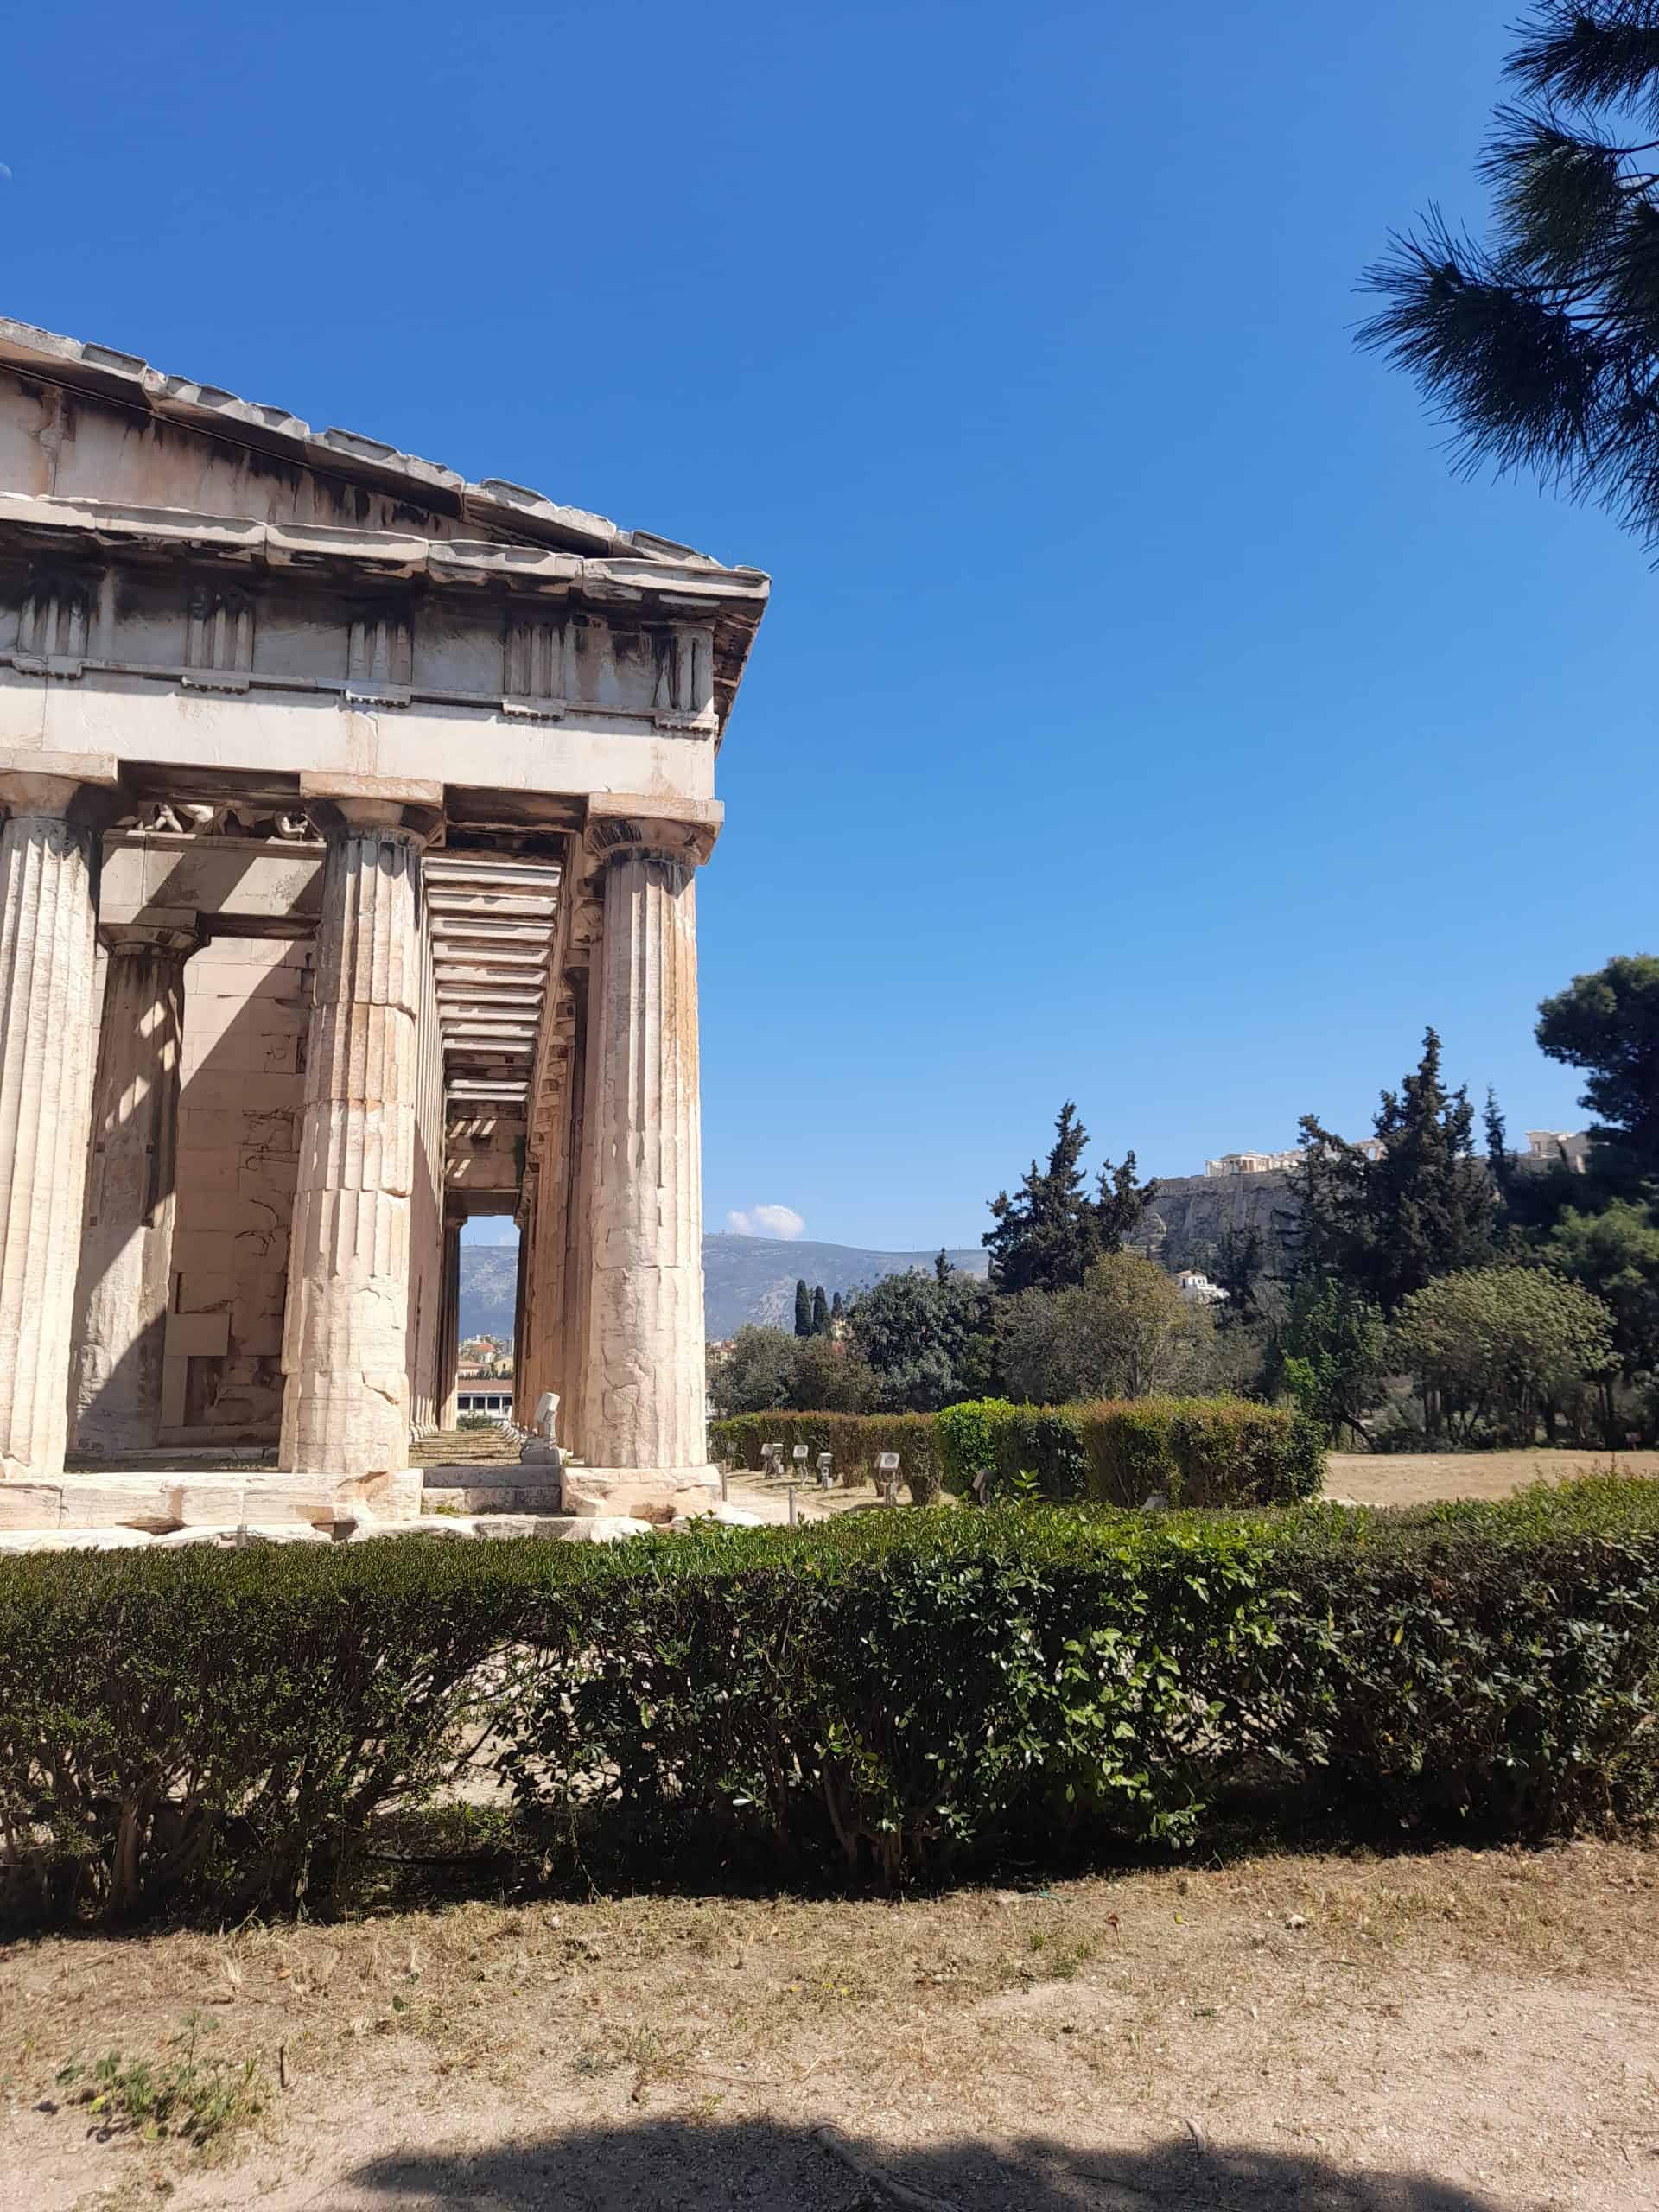 The Ancient Agora is Socrates' old stomping ground